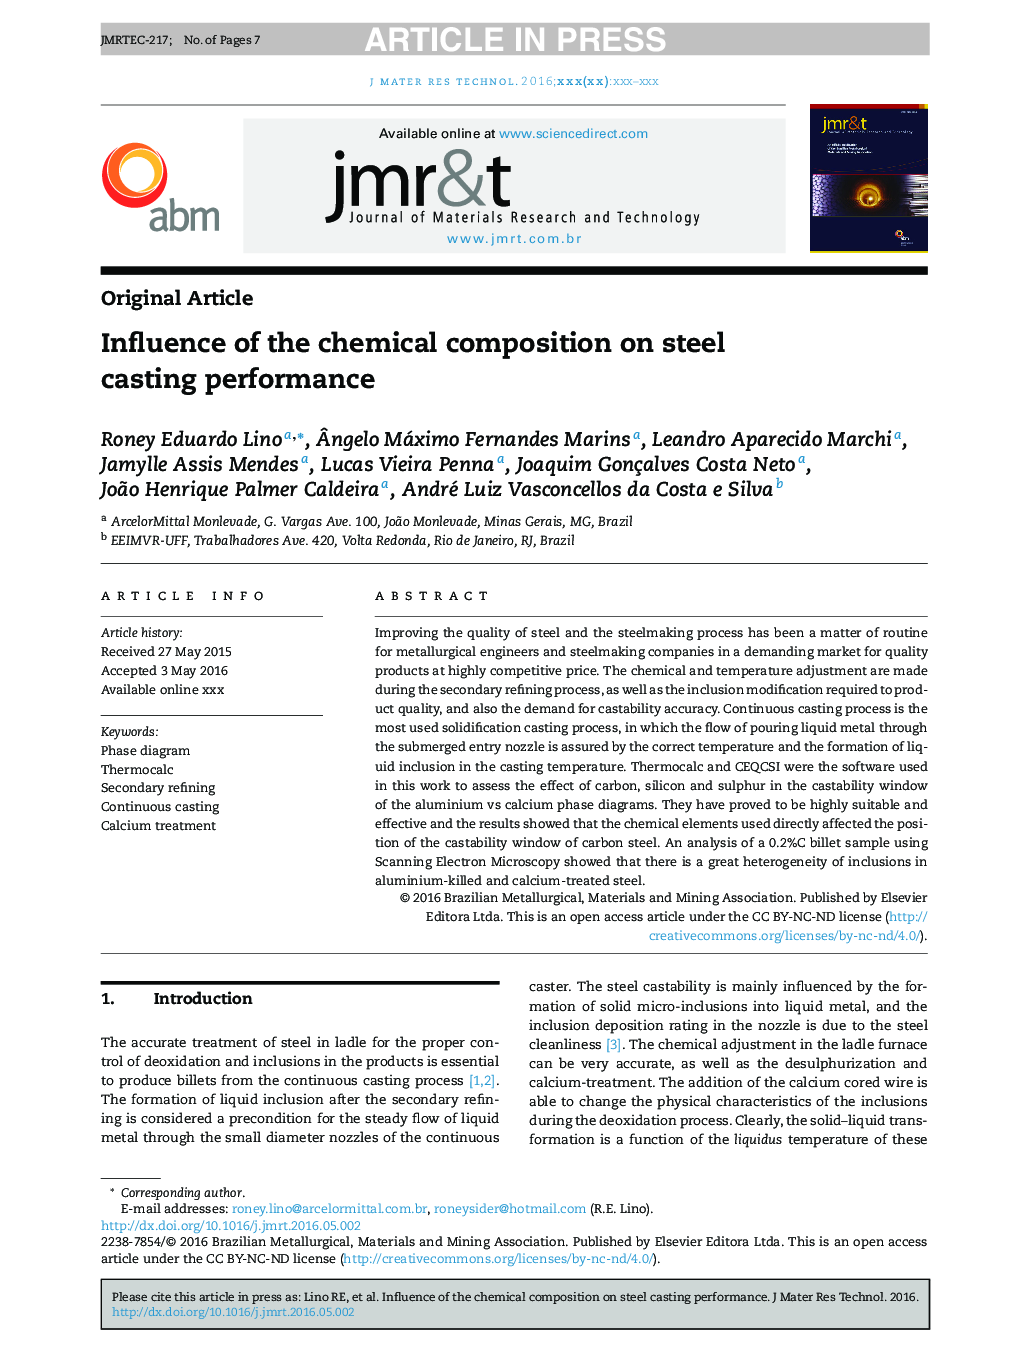 Influence of the chemical composition on steel casting performance